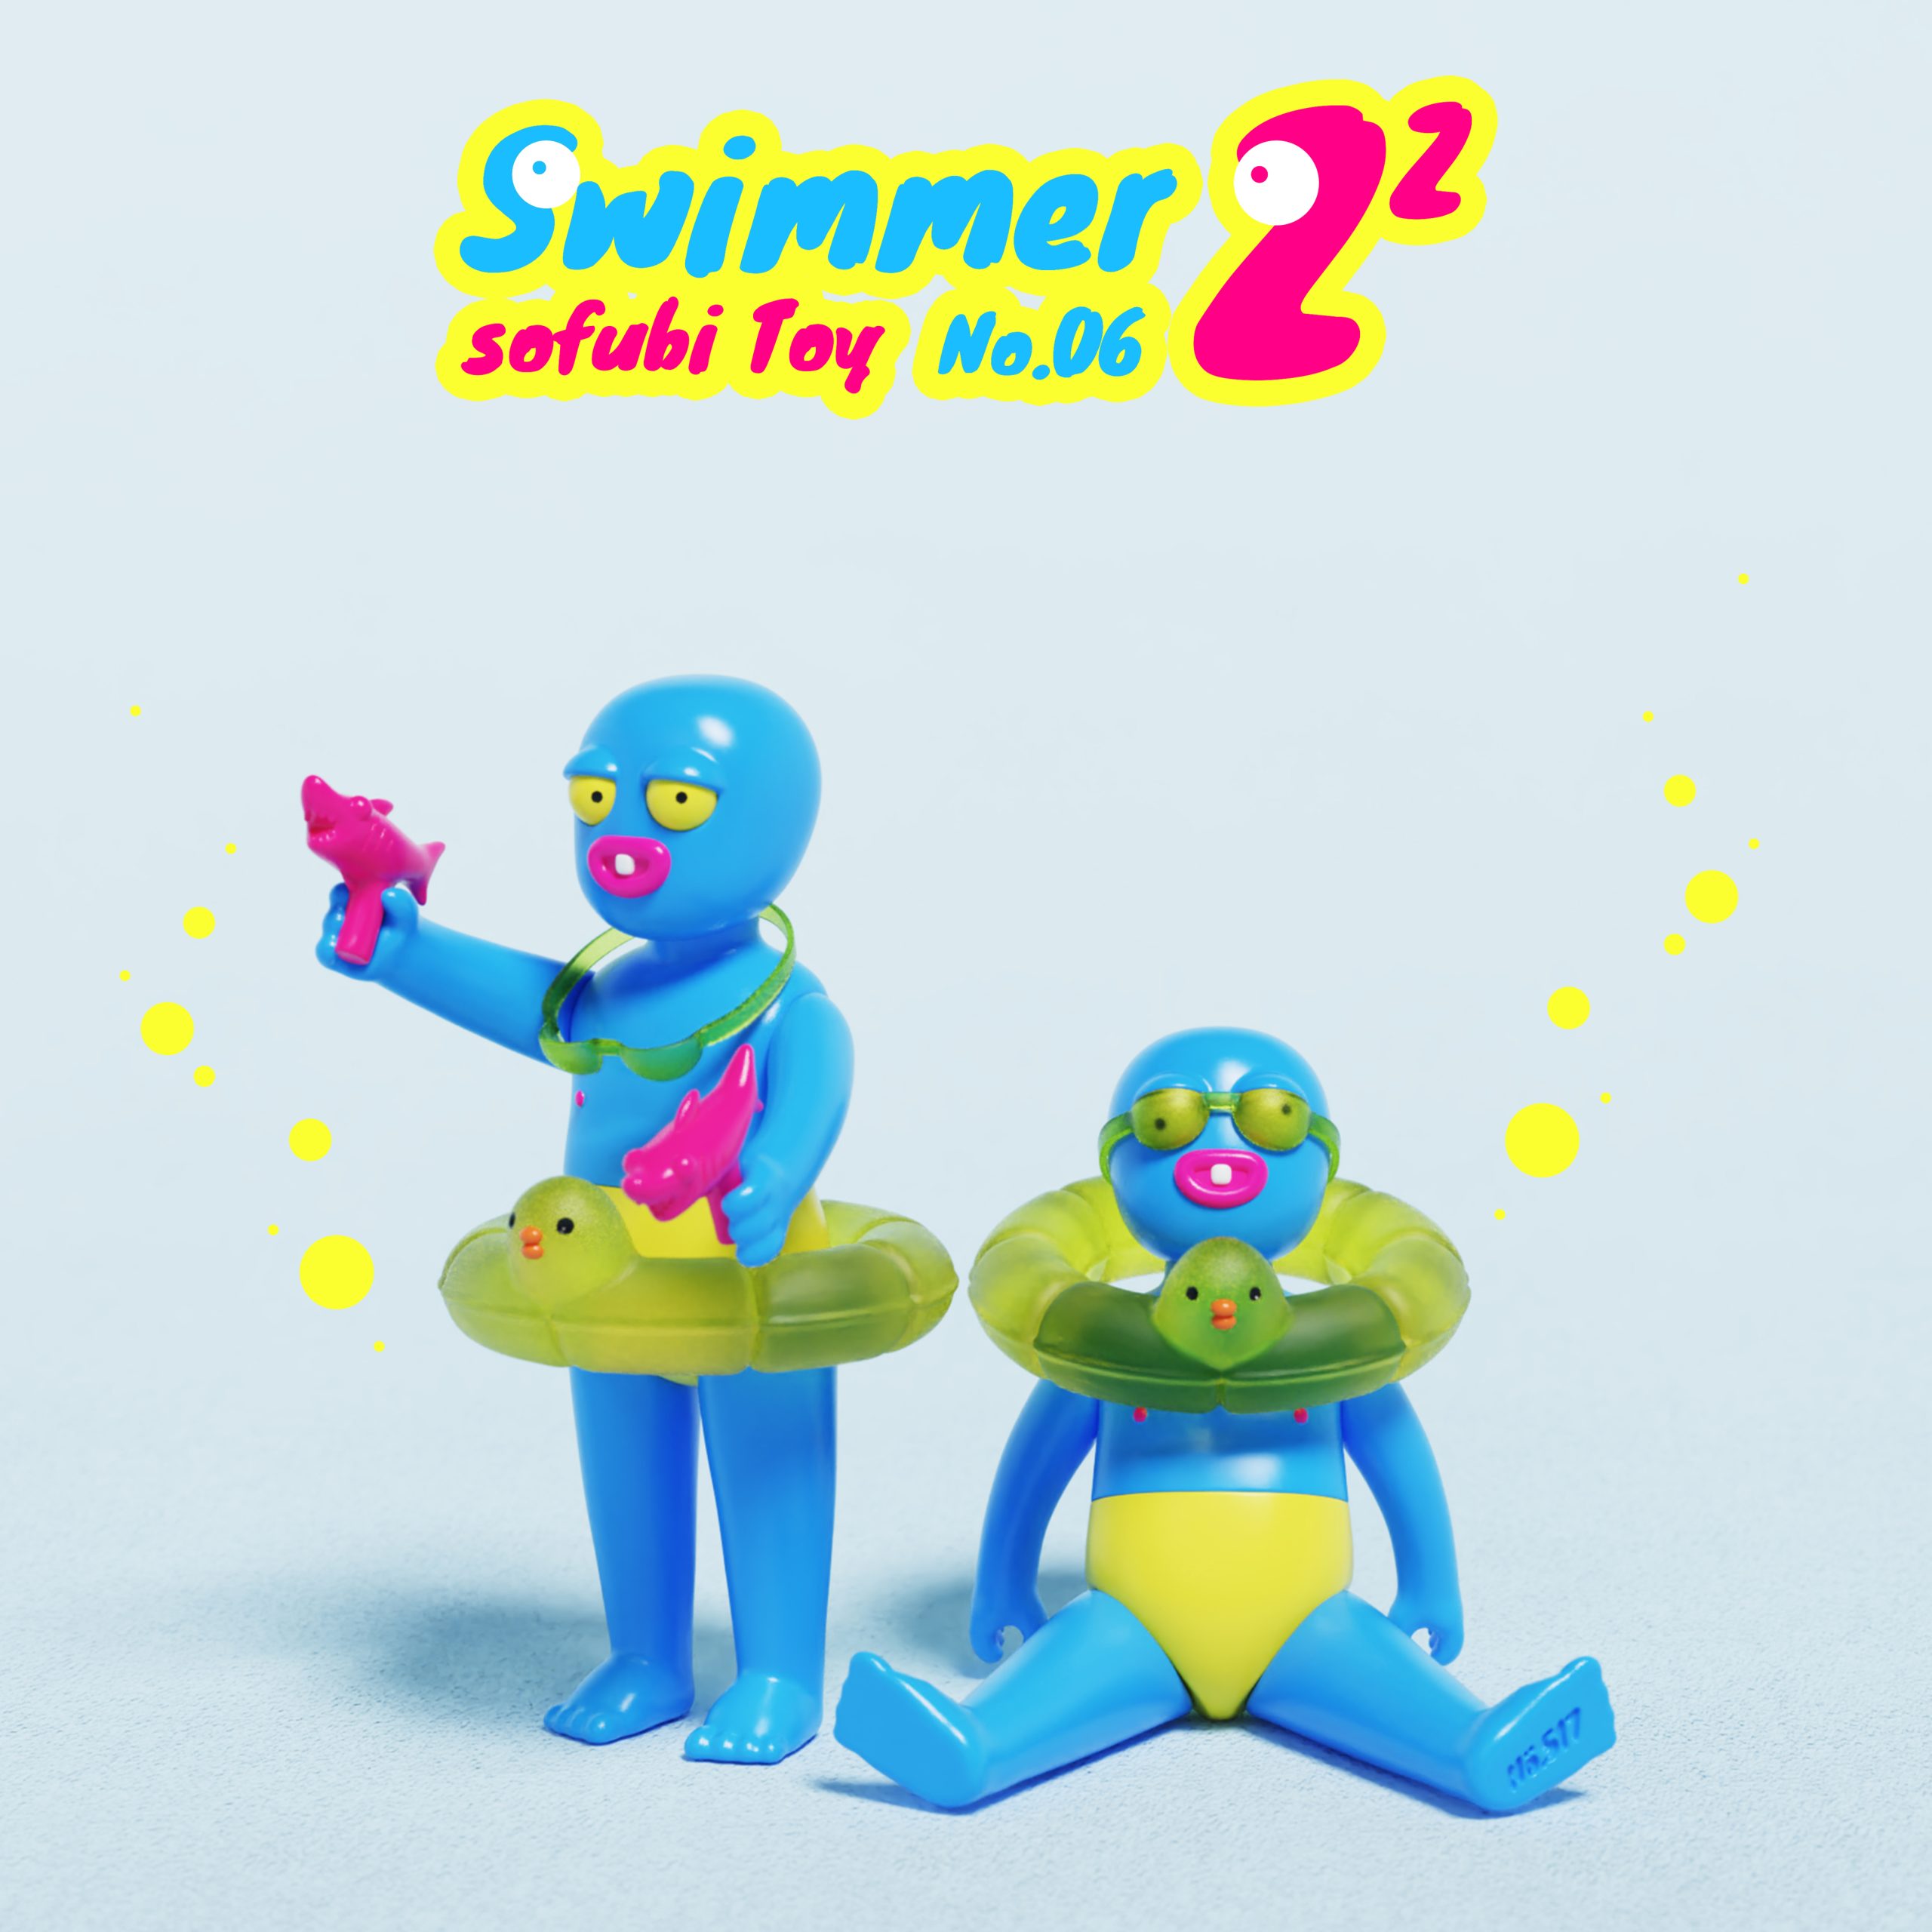 Zz The SwimmerZ by No 517 Toy - The Toy Chronicle